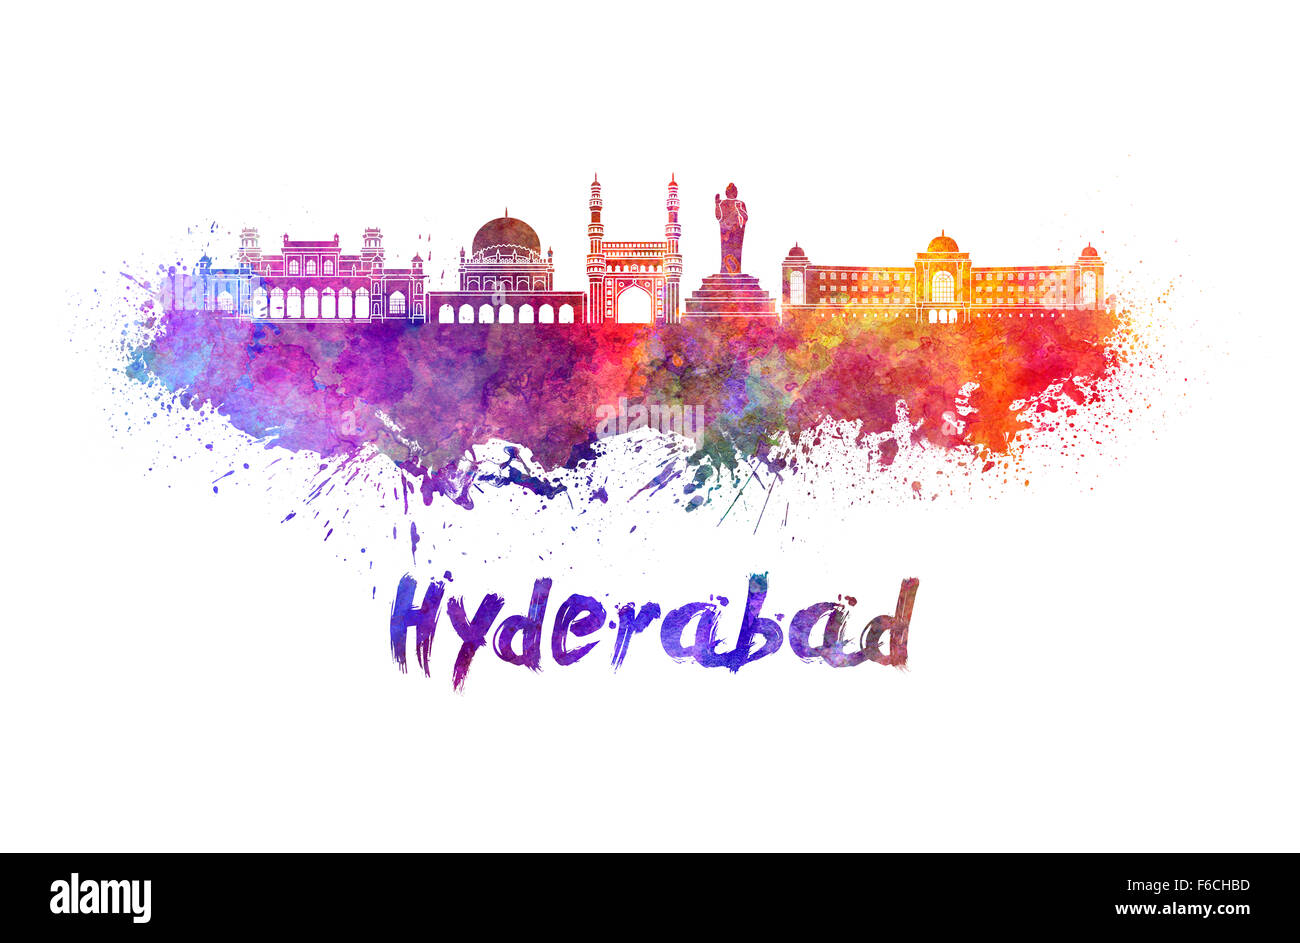 Hyderabad skyline in watercolor splatters with clipping path Stock Photo